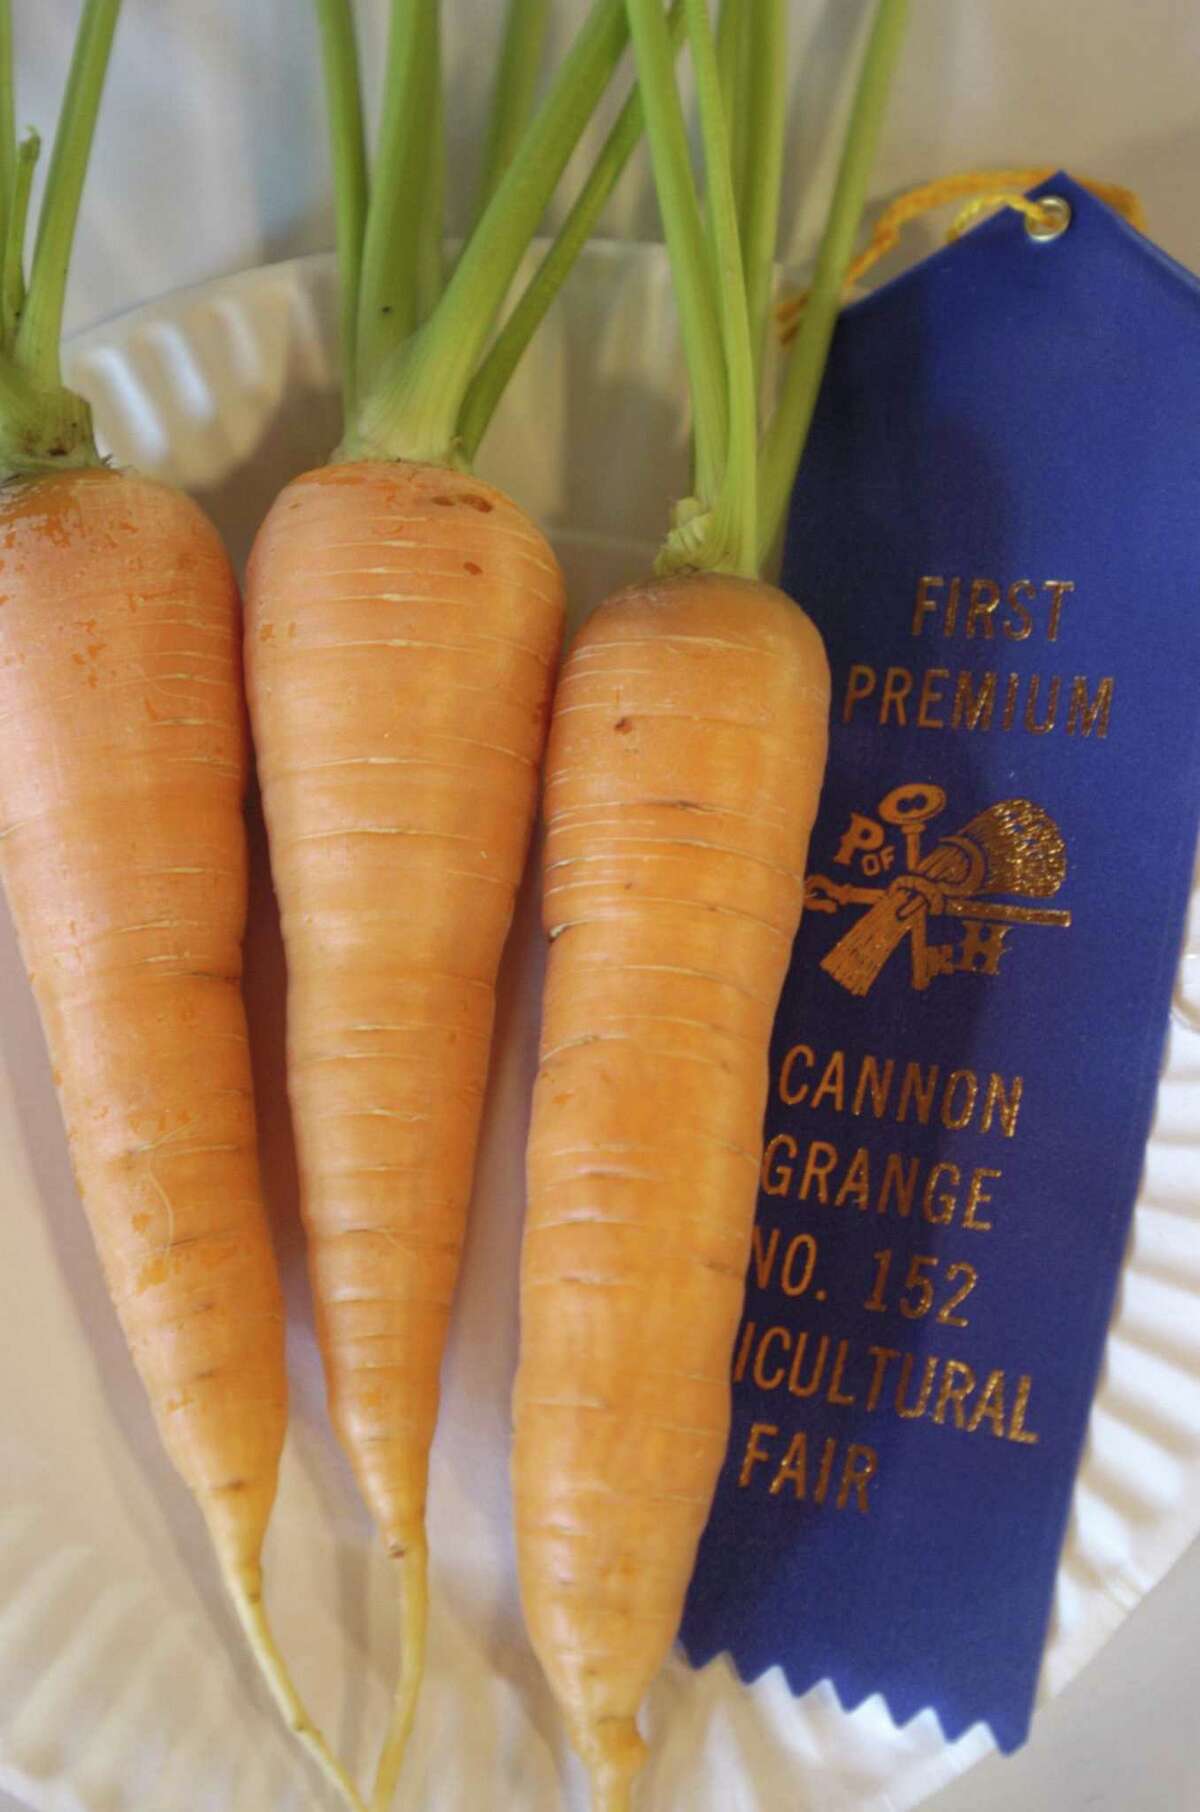 Award-winning carrots from a previous Cannon Grange Fair.